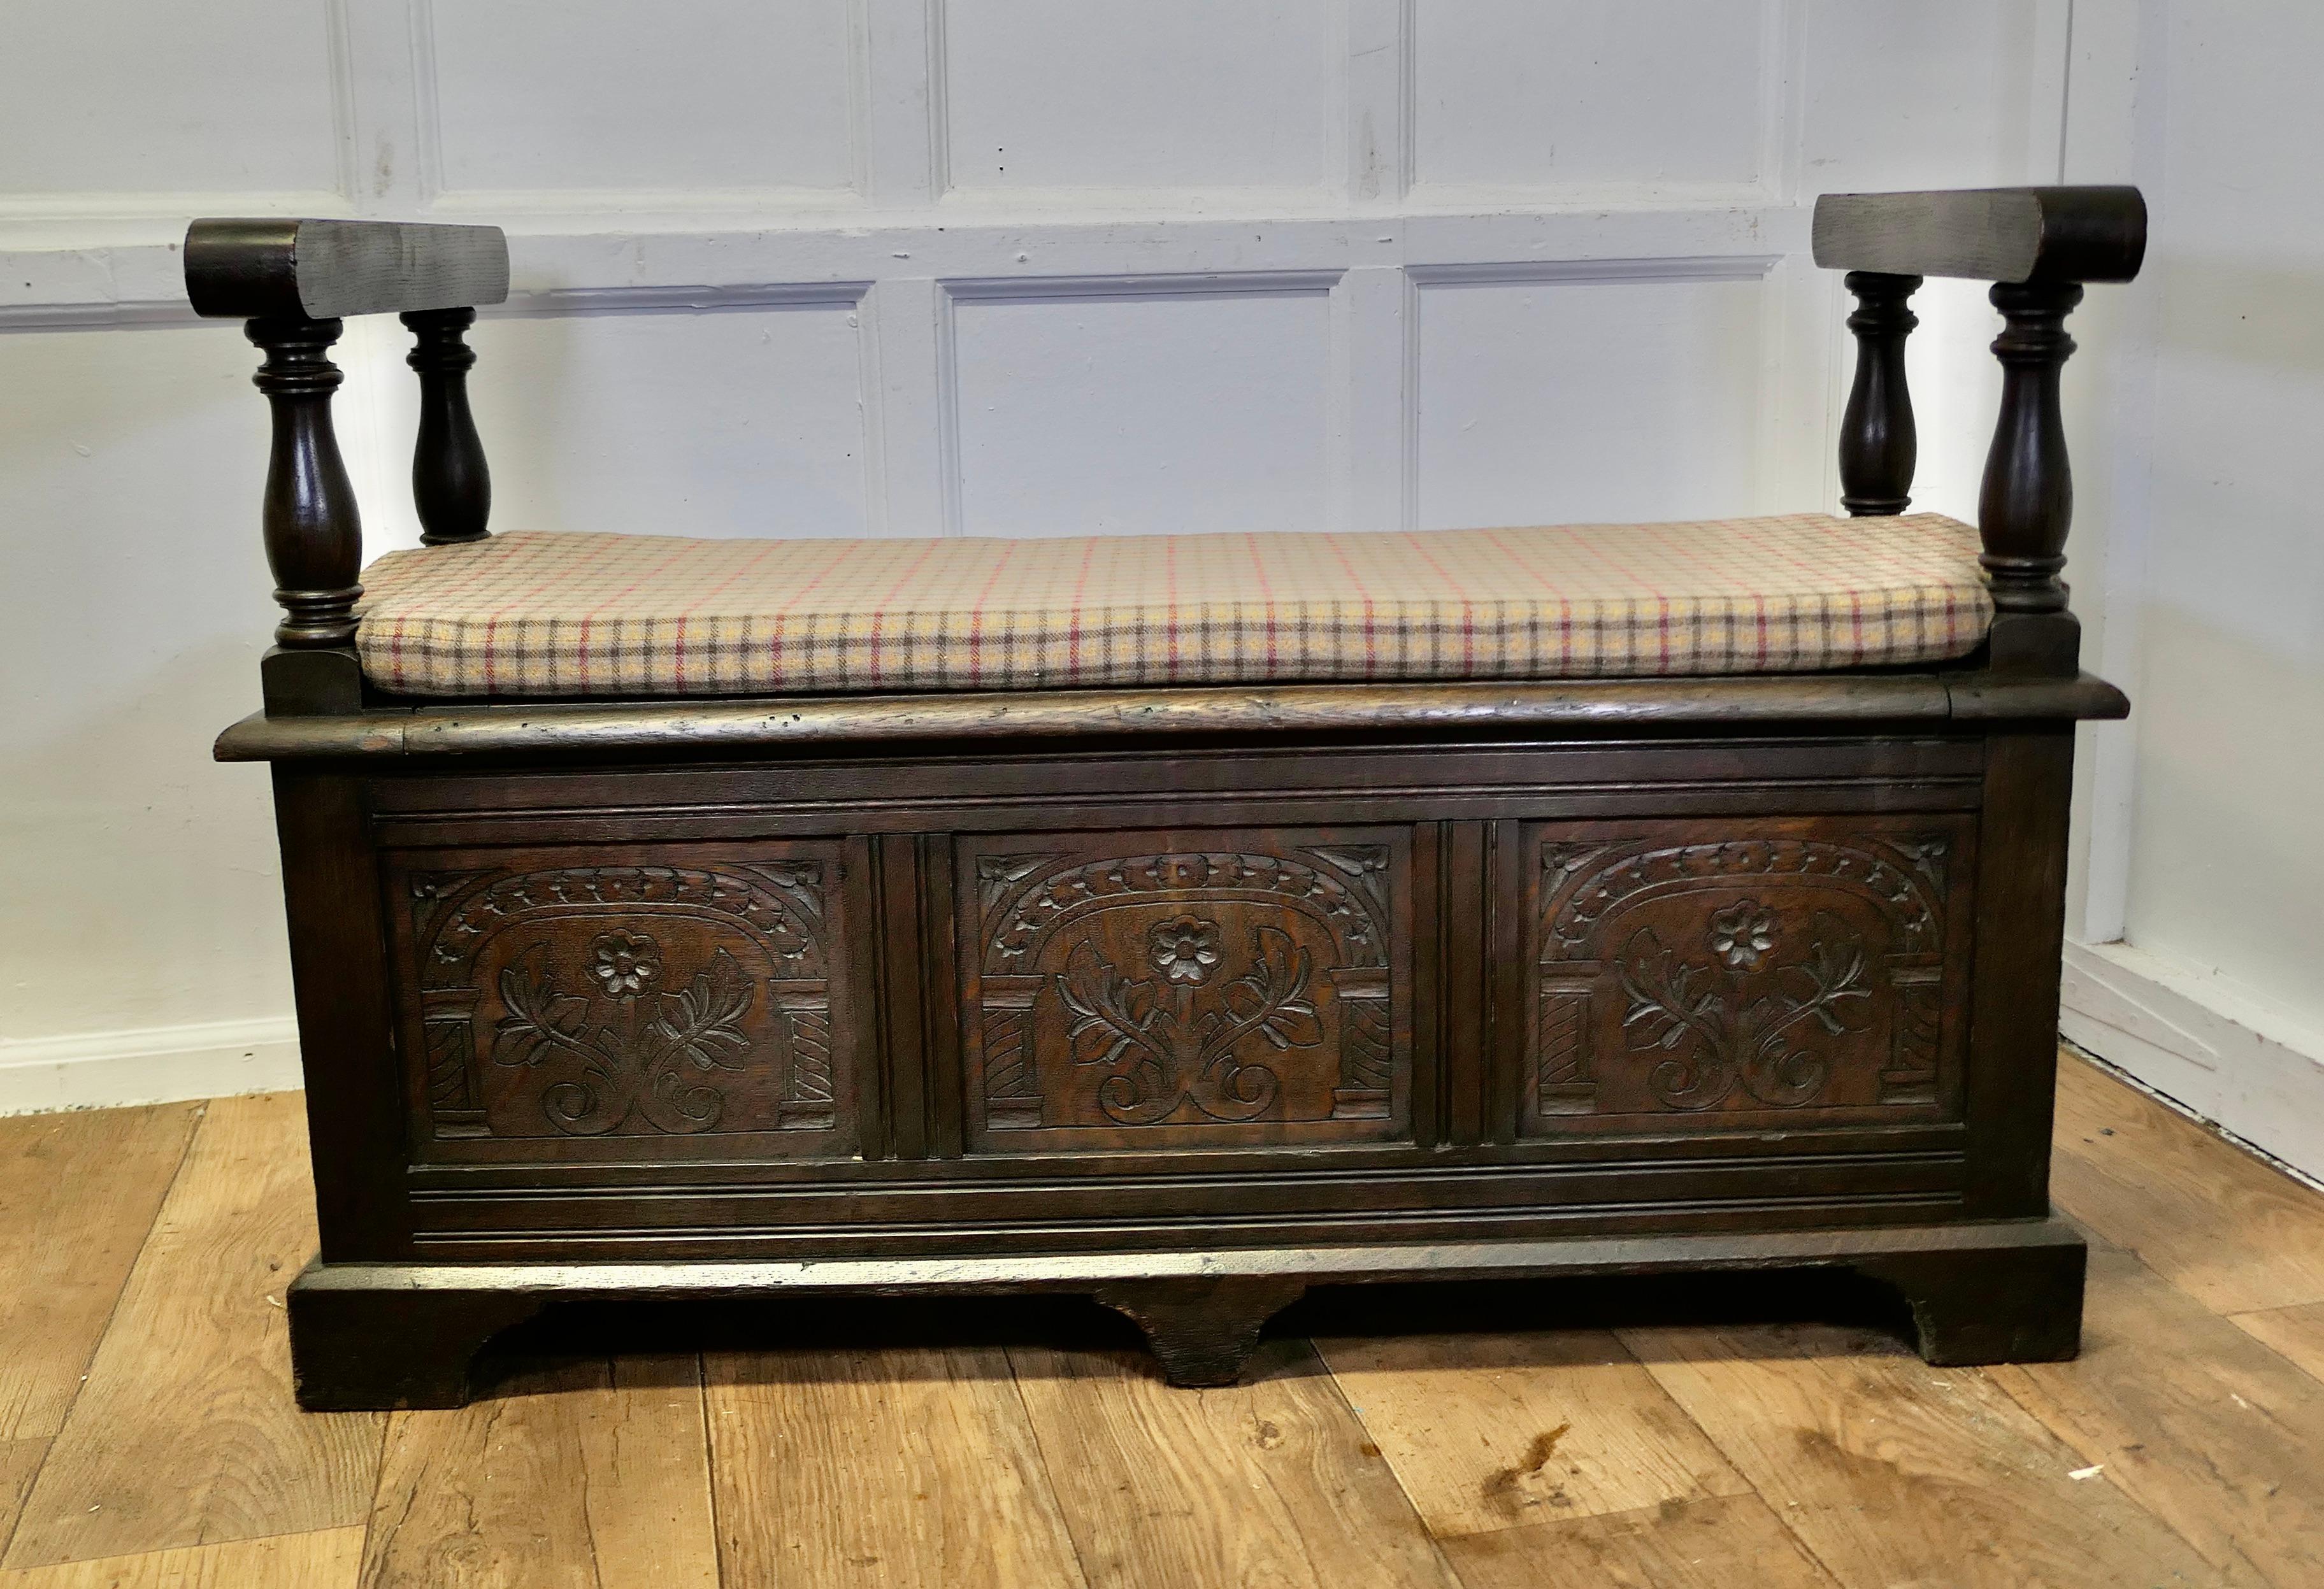 19th Century Carved Oak Coffer, Hall Seat

This is a lovely old piece and a very useful Hall Bench, it has storage under the seat and a new fitted cushion which has been upholstered with a wool tweed in earth colours
The coffer has a carved front